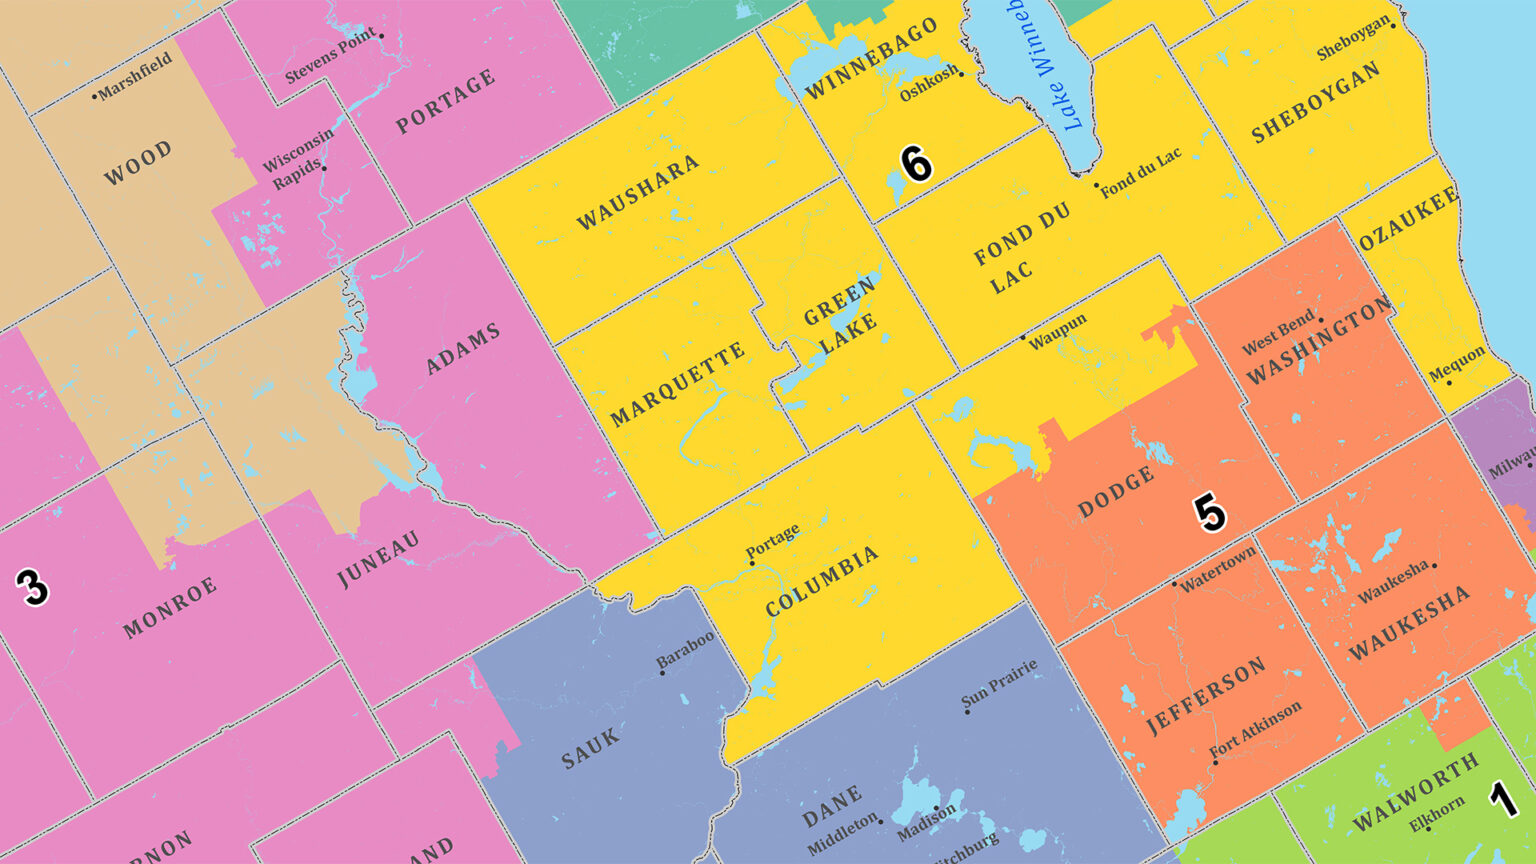 A portion of a map tilted at an angle shows the outlines of Wisconsin Congressional districts, with labels marking their numbers alongside county names and the locations of some larger municipalities in central and southeastern portions of the state.